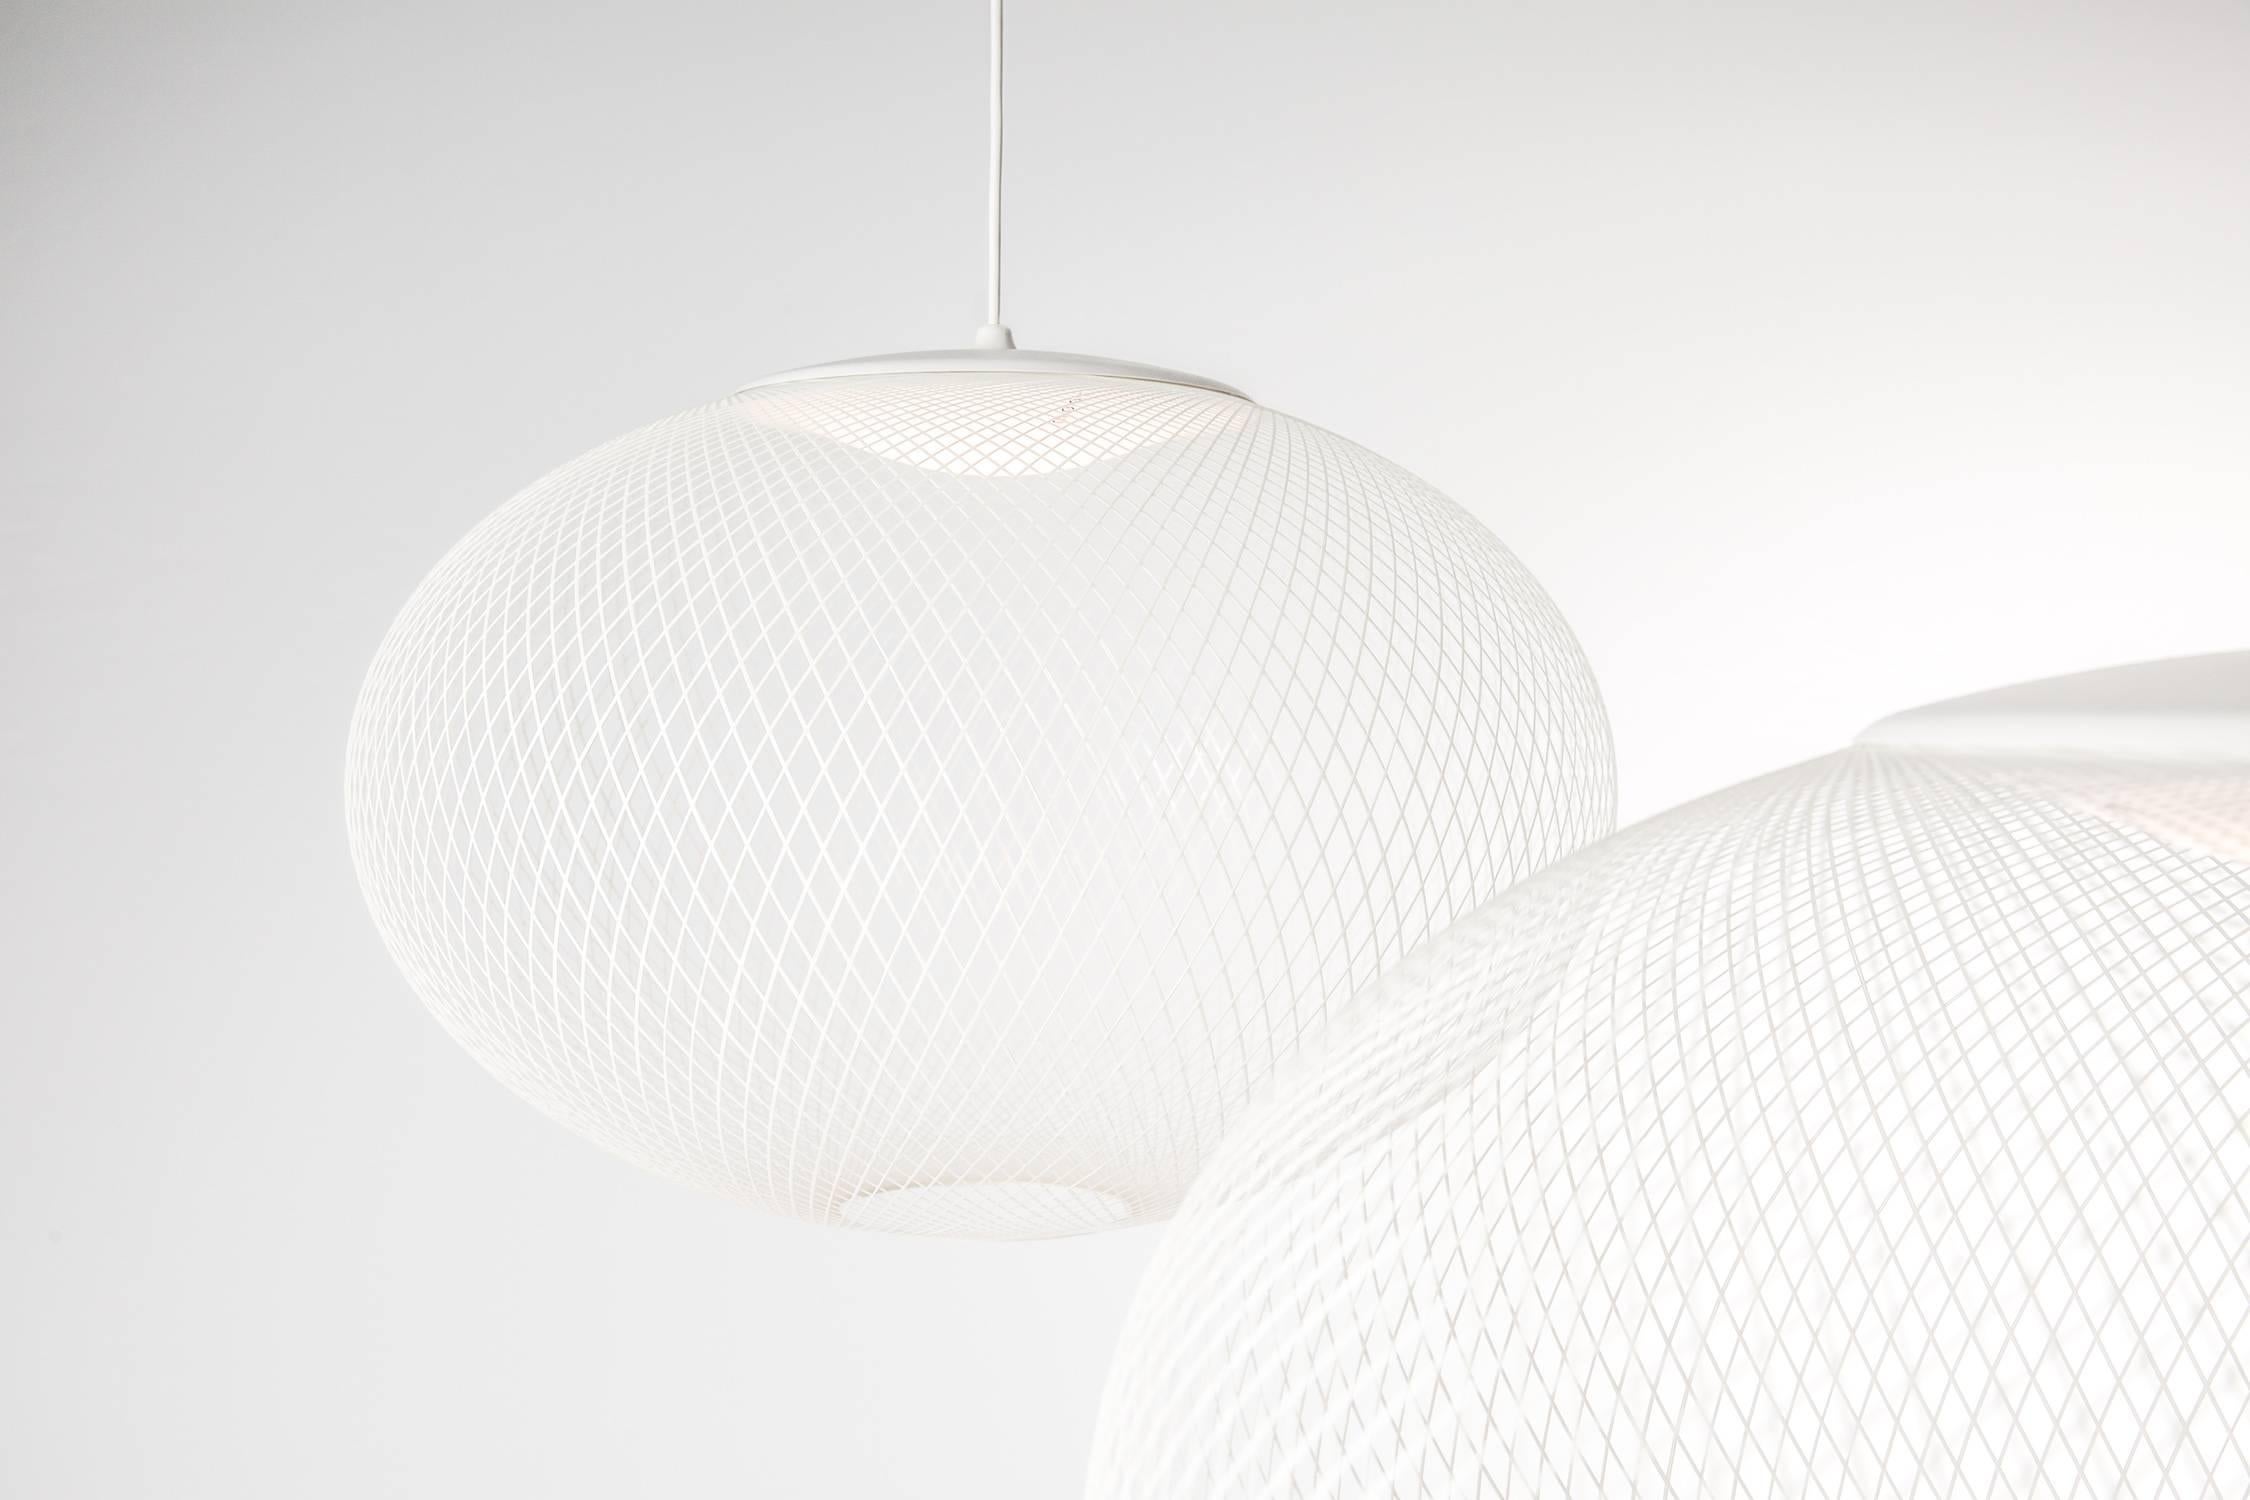 The NR2 Medium is an elegant, bright, lighthearted bubble is dressed in a fine web of white fiberglass thread that shines and glimmers in the light.

The NR2 Medium in white comes with a 4 meter long cable in white and a white ceiling rose. A 10